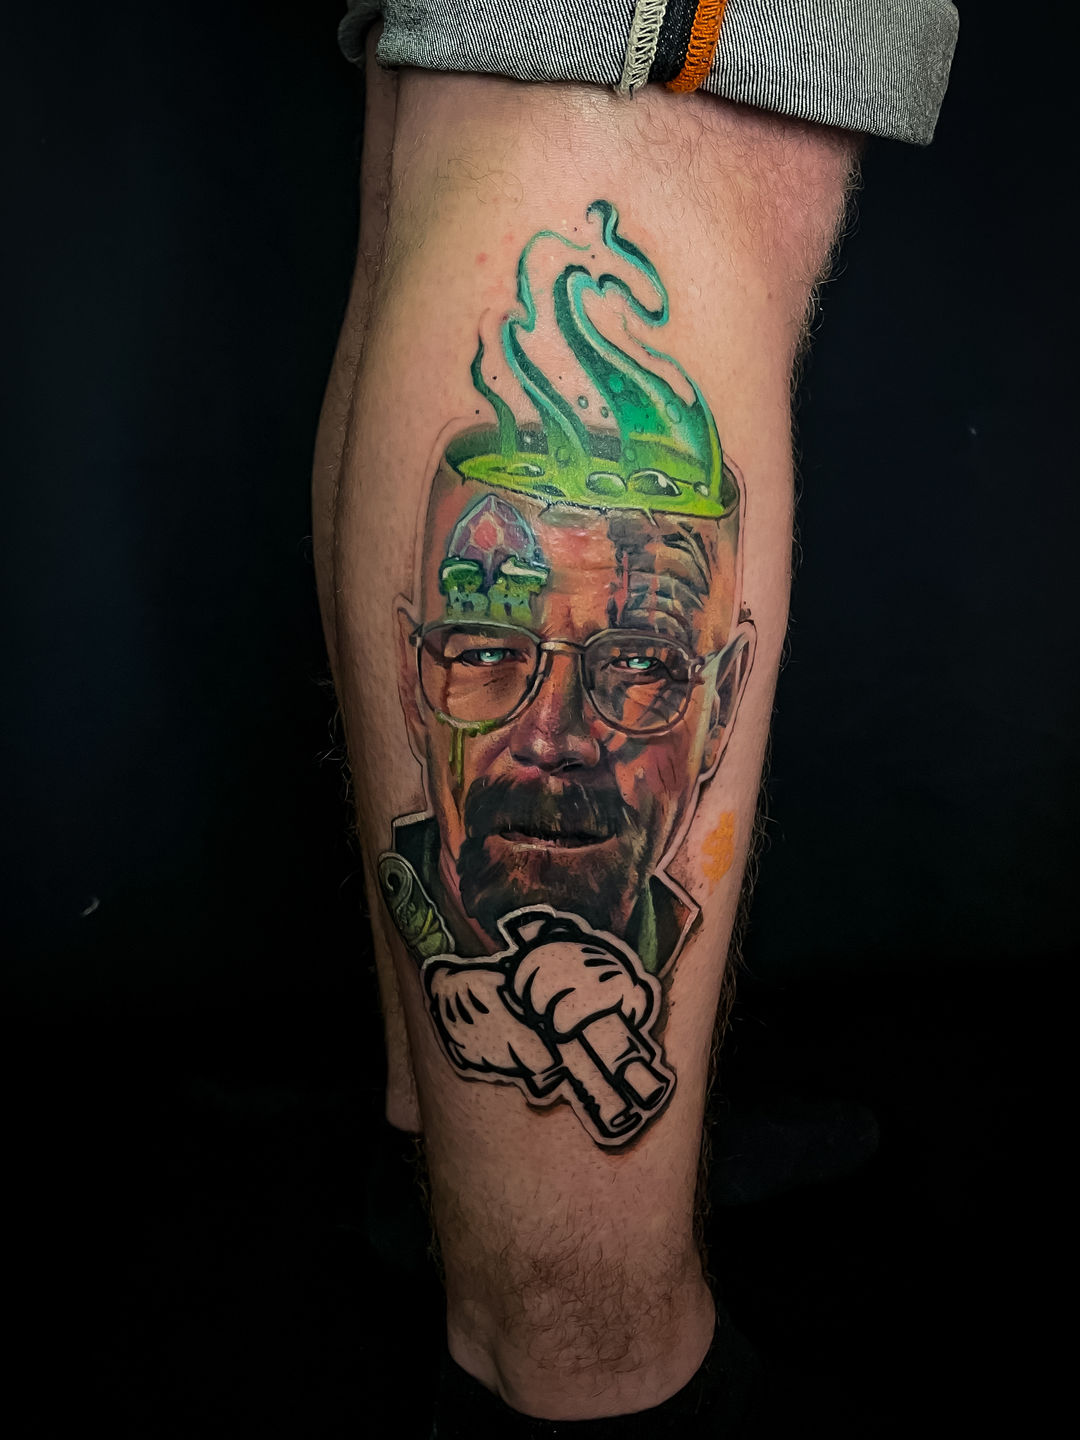 lavishworm240 walter white as a rapper with tattoo on her body